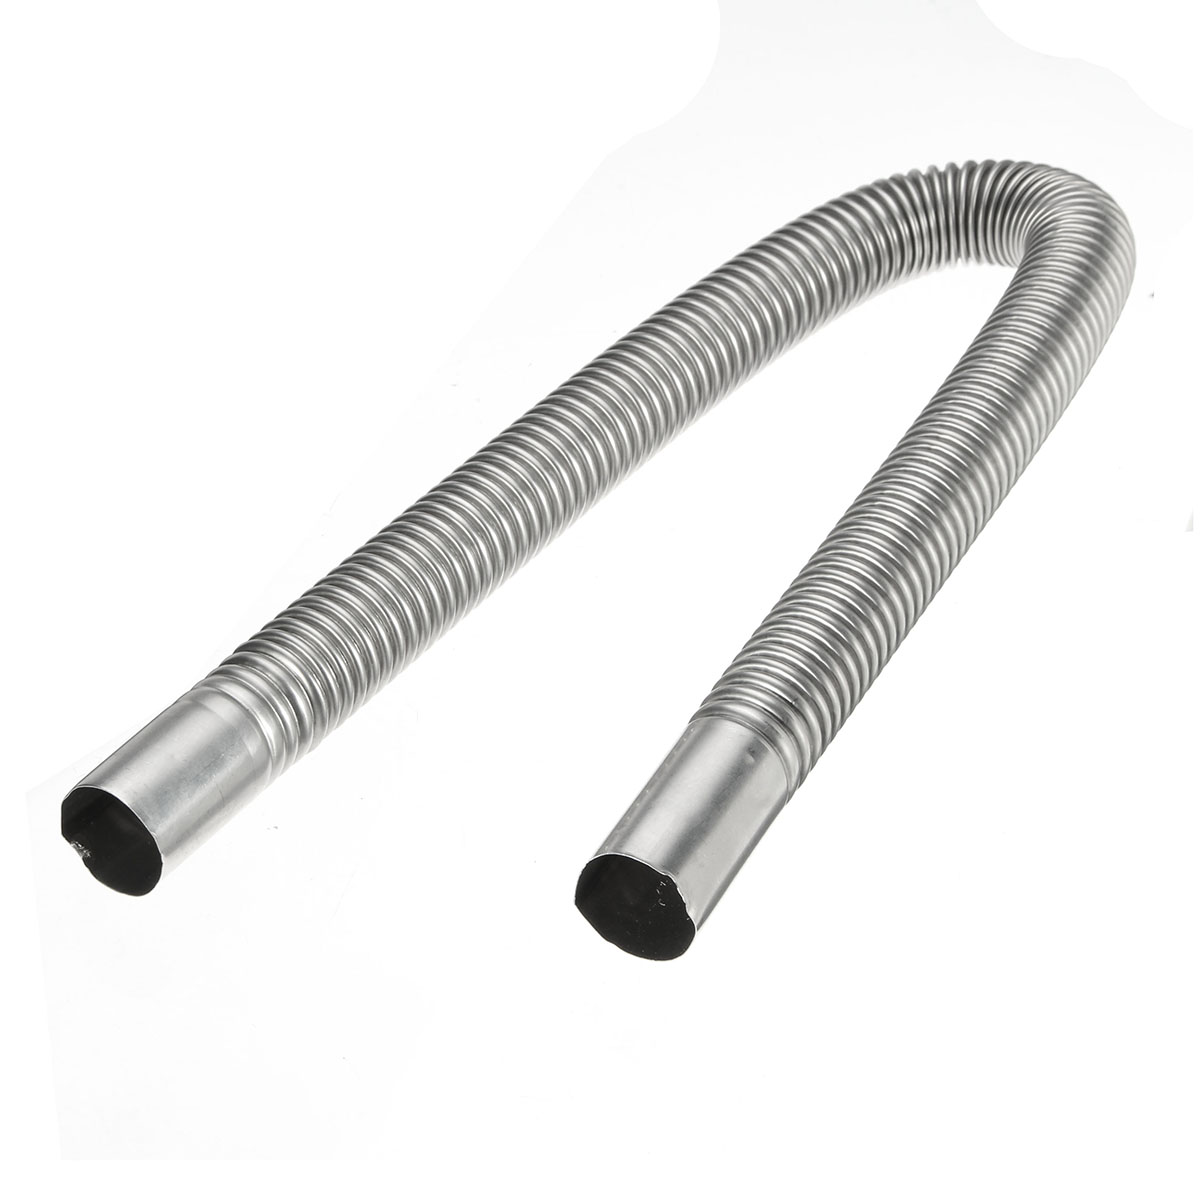 24mm-Exhaust-Silencer-25mm-Filter-Exhaust--Intake-Pipe-For-Air-Diesel-Heater-1412374-6